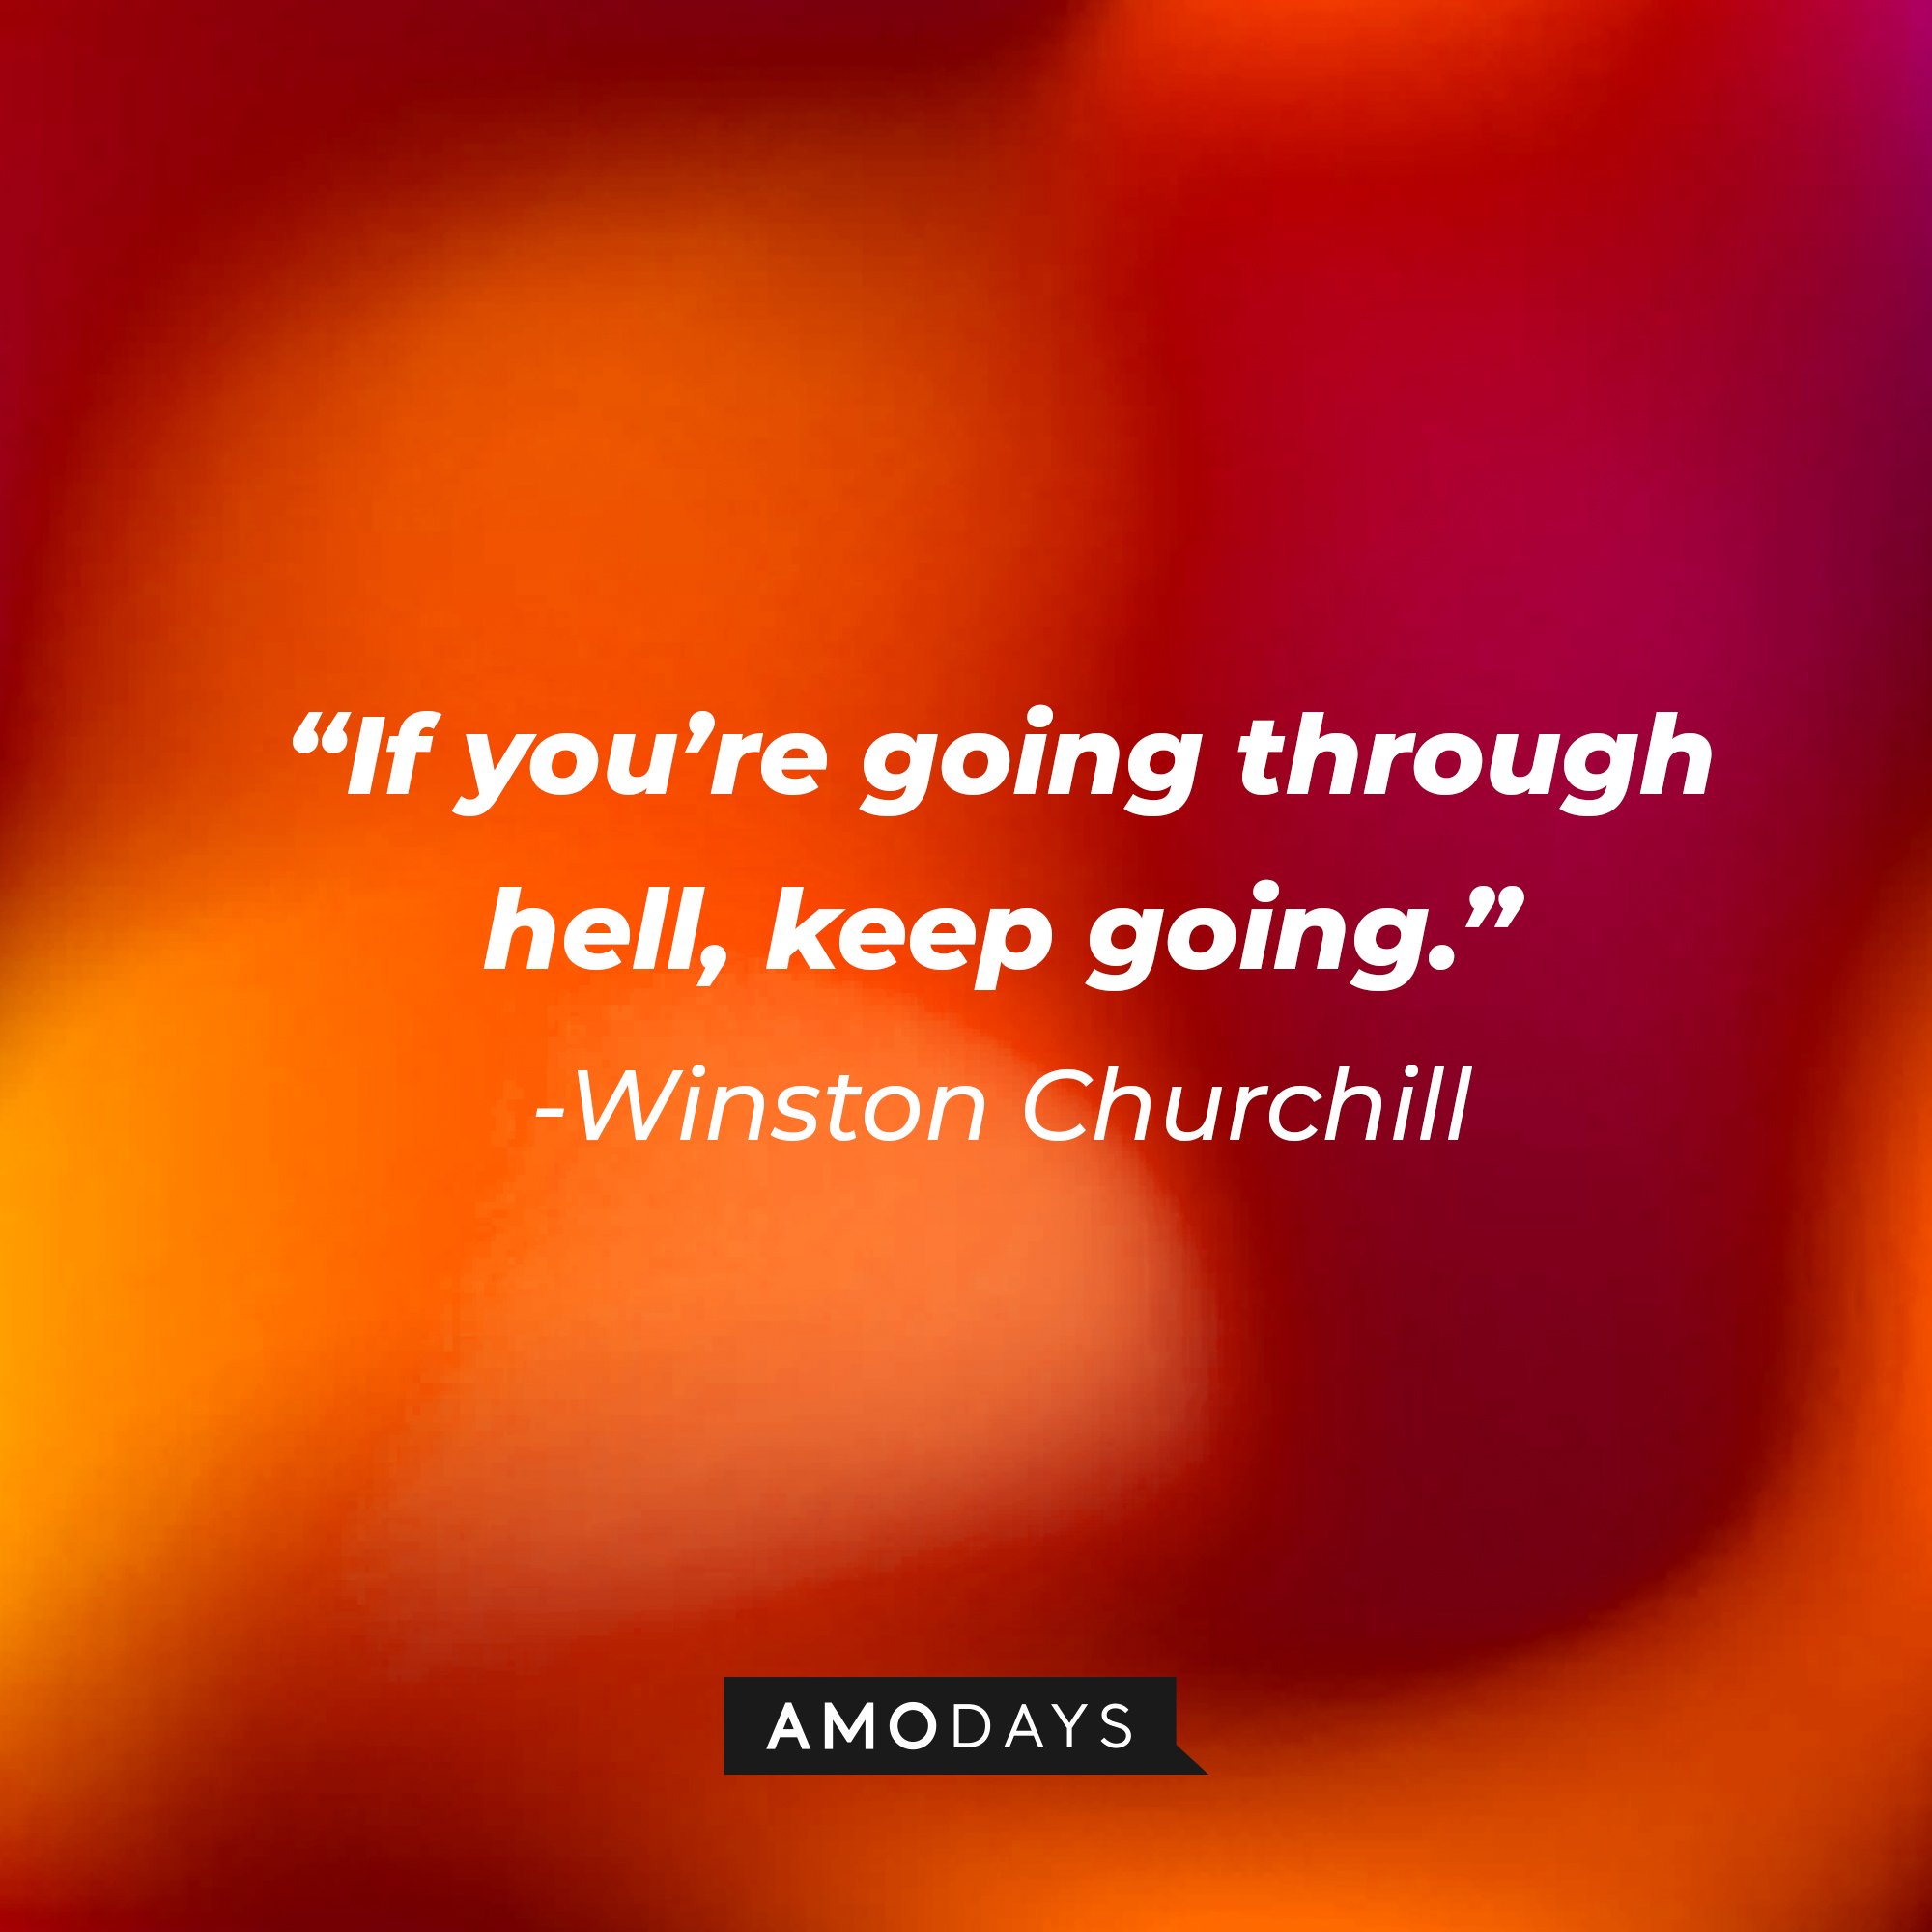 Winston Churchill’s quote: “If you’re going through hell, keep going.” | Image: AmoDays 